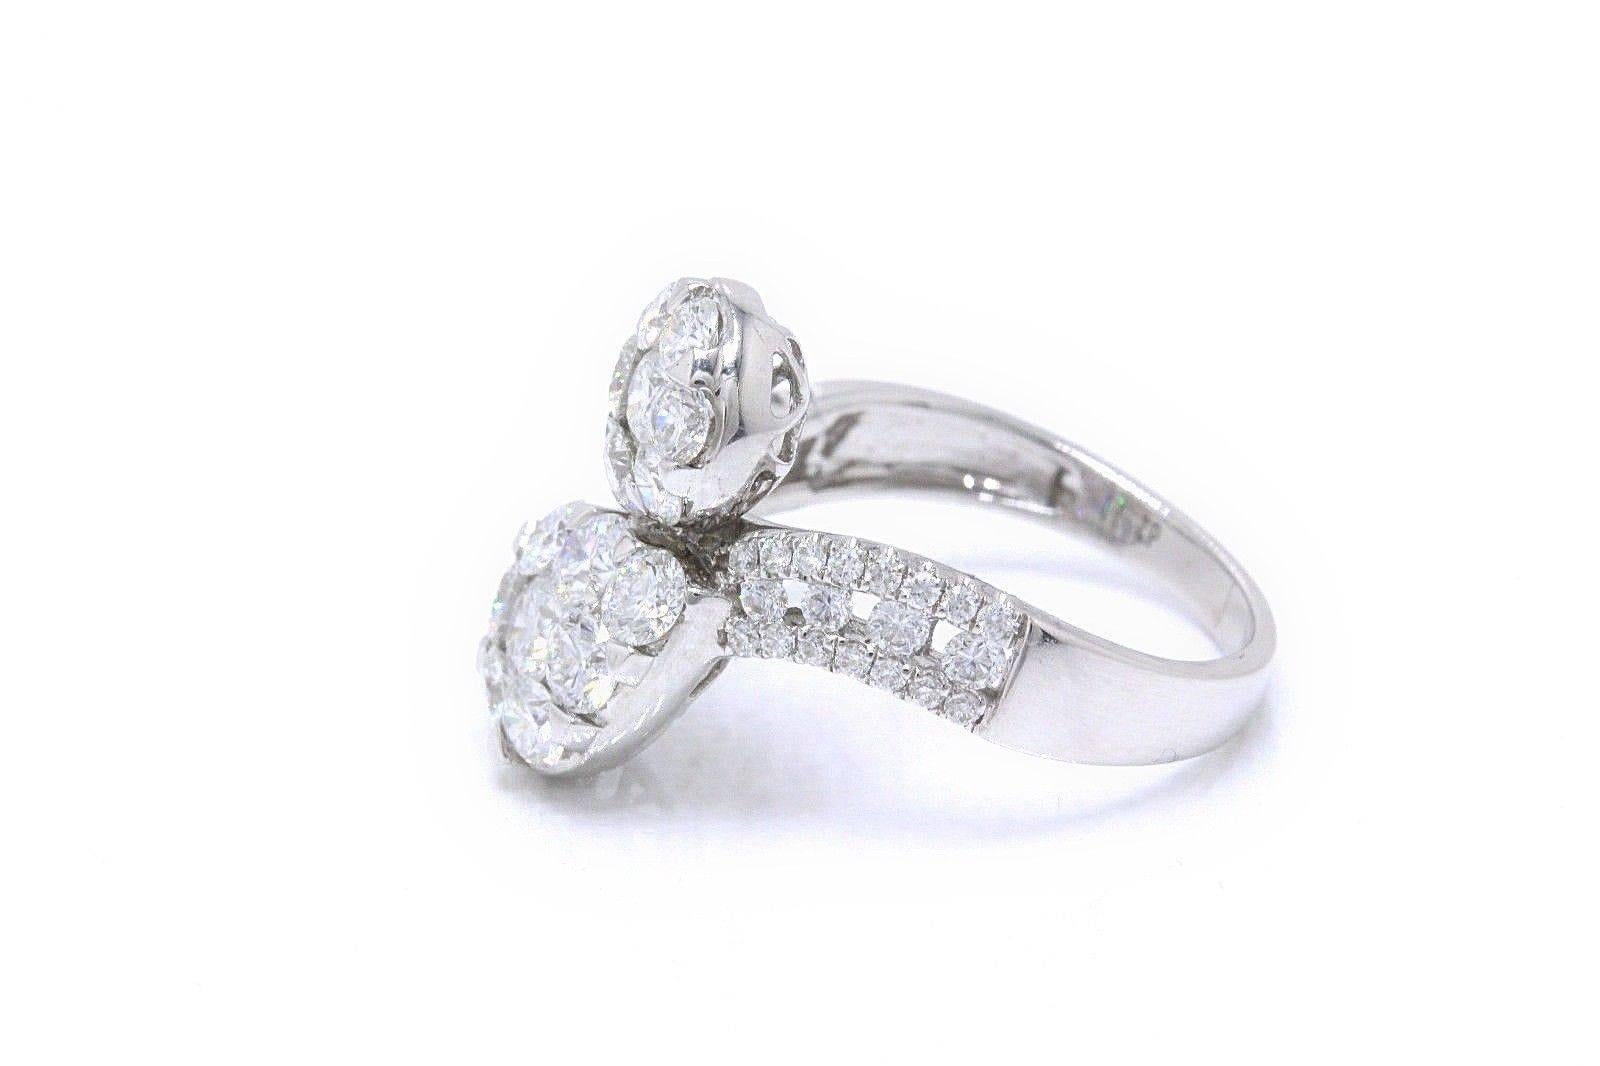 DIAMOND PAVE COCKTAIL RING
Style:  Twist
Metal:  18KT White Gold
Size:  7 - Sizable
Width:  2 MM - 18 MM
Total Carat Weight:  2.11 TCW
Diamond Shape:  60 Round Diamonds
Diamond Color & Clarity:  F / VS
Hallmark:  G18K 750 d2.11
Includes:  Elegant